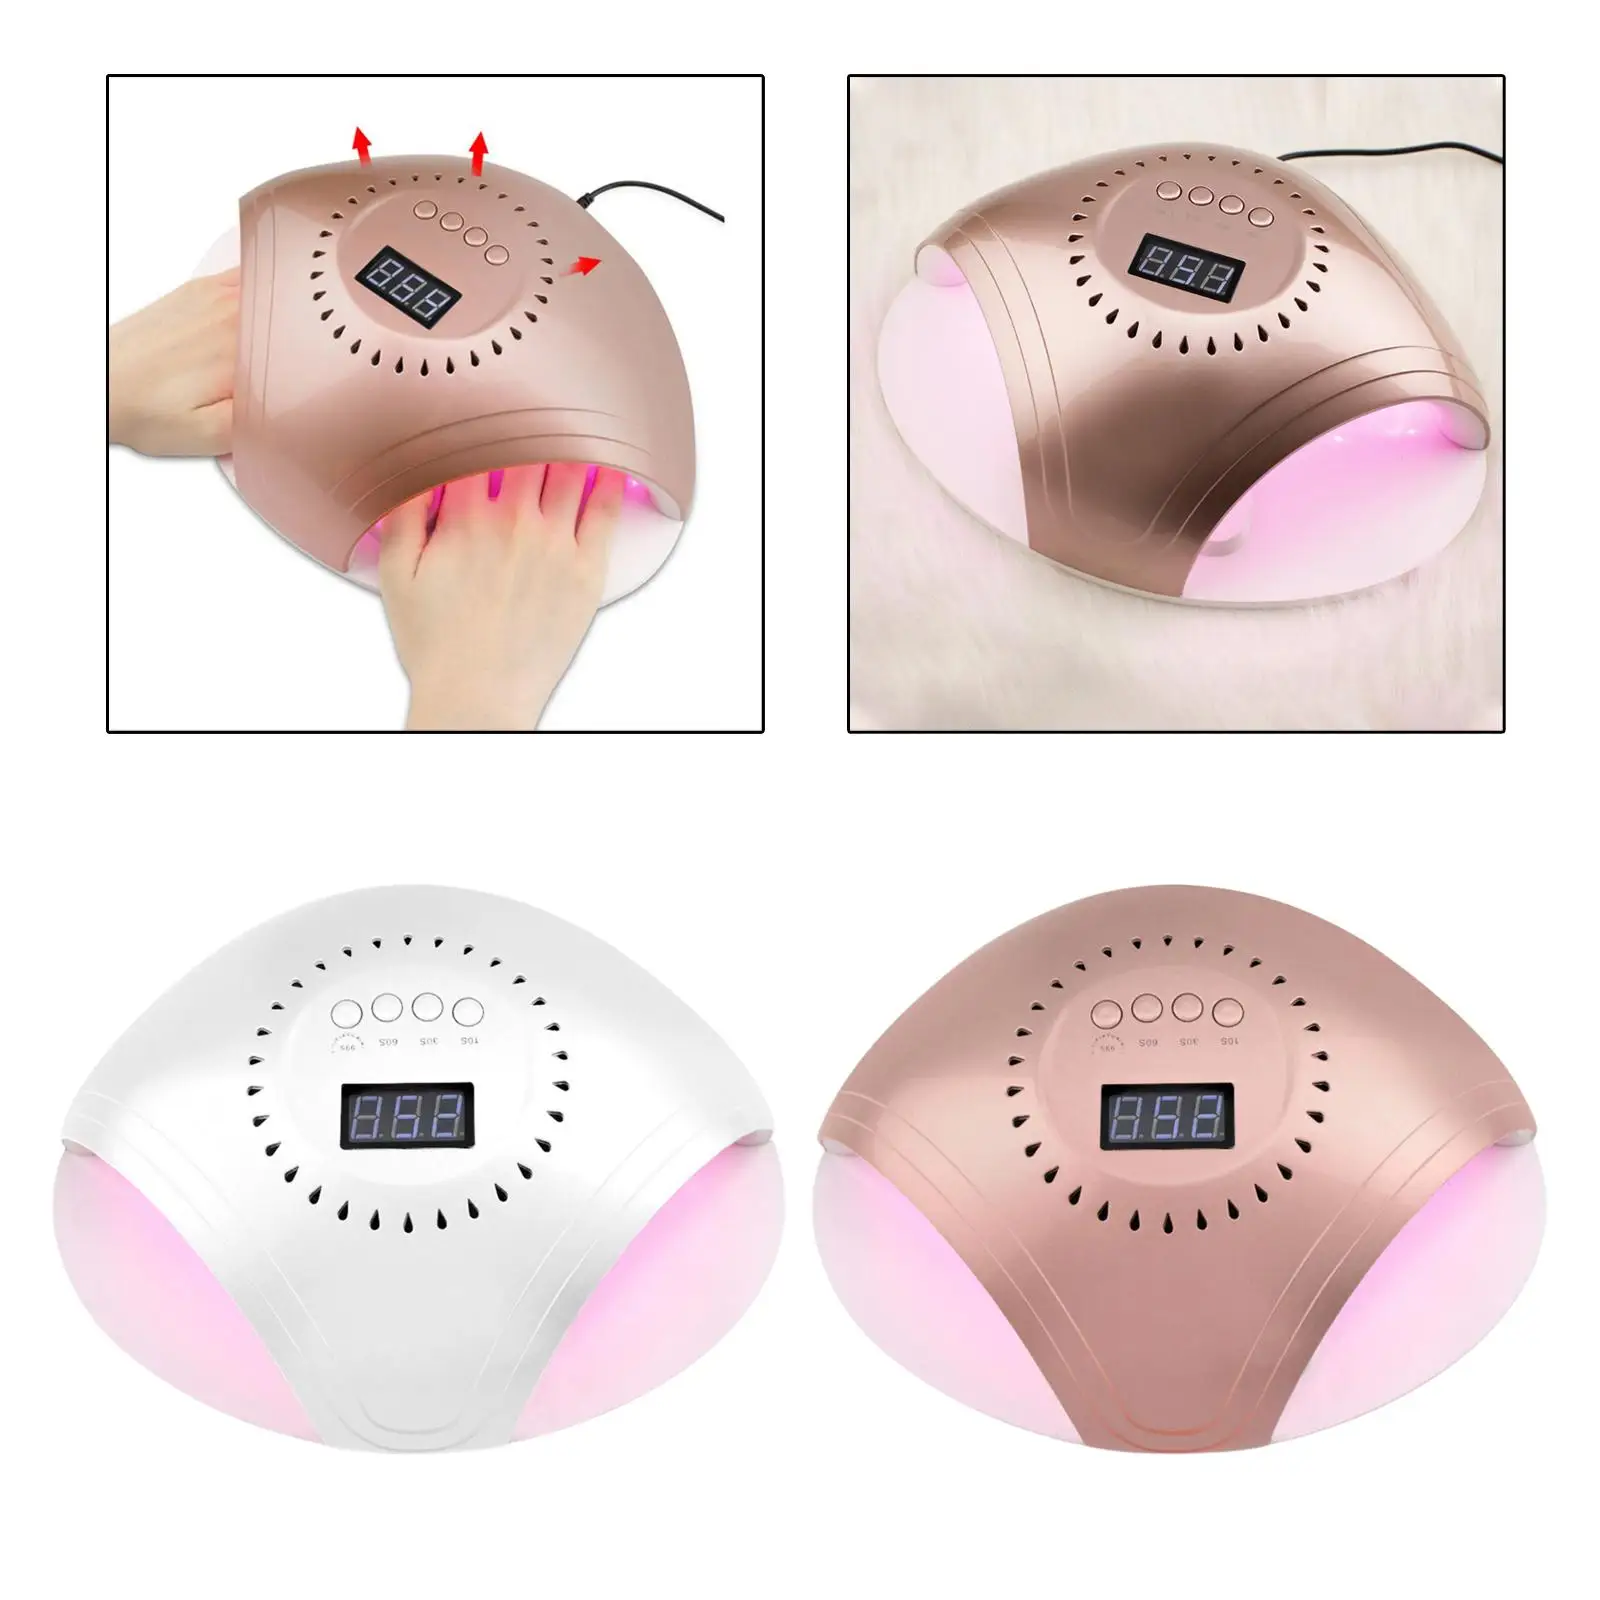 UV LED Nail Lamp 86W with 43 Lamp Beads Larger Space Gel Lamp for Office Use School Woman